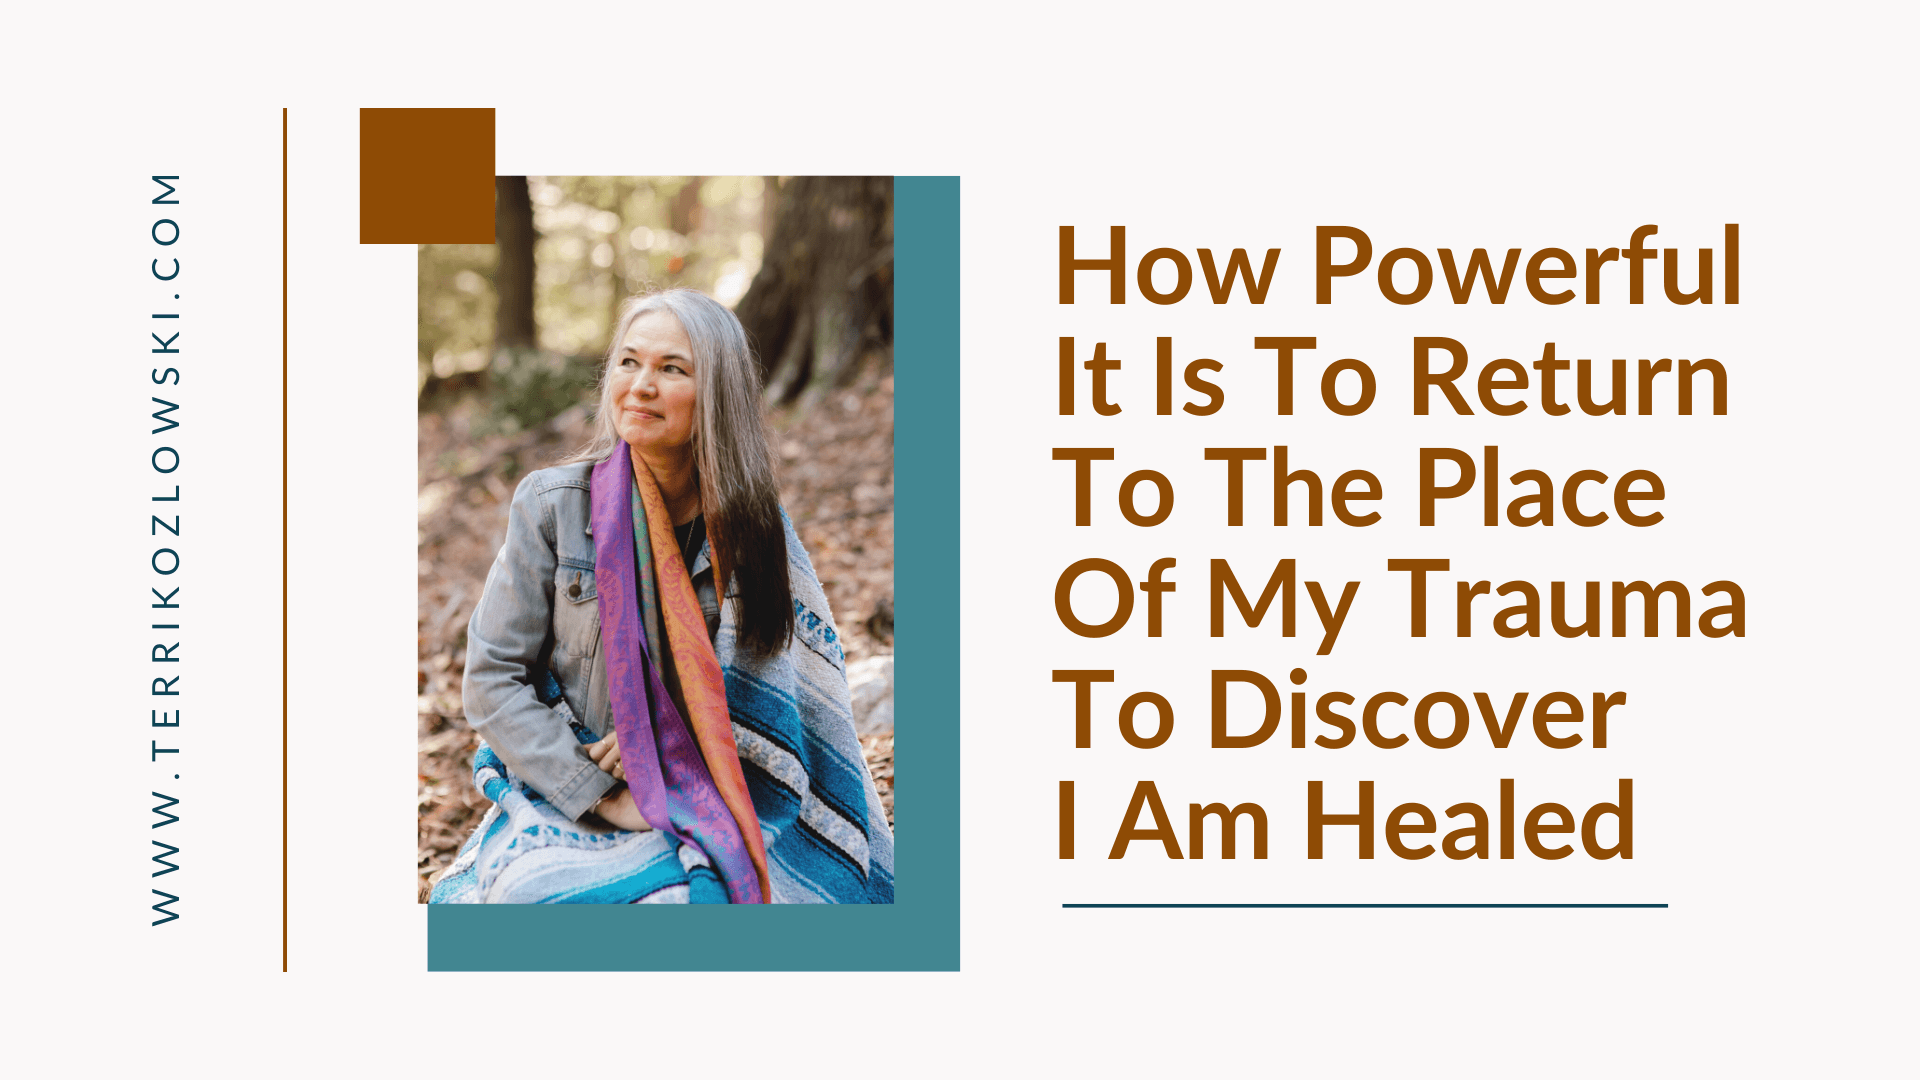 How Powerful It Is To Return To The Place Of My Trauma To Discover I Am Healed